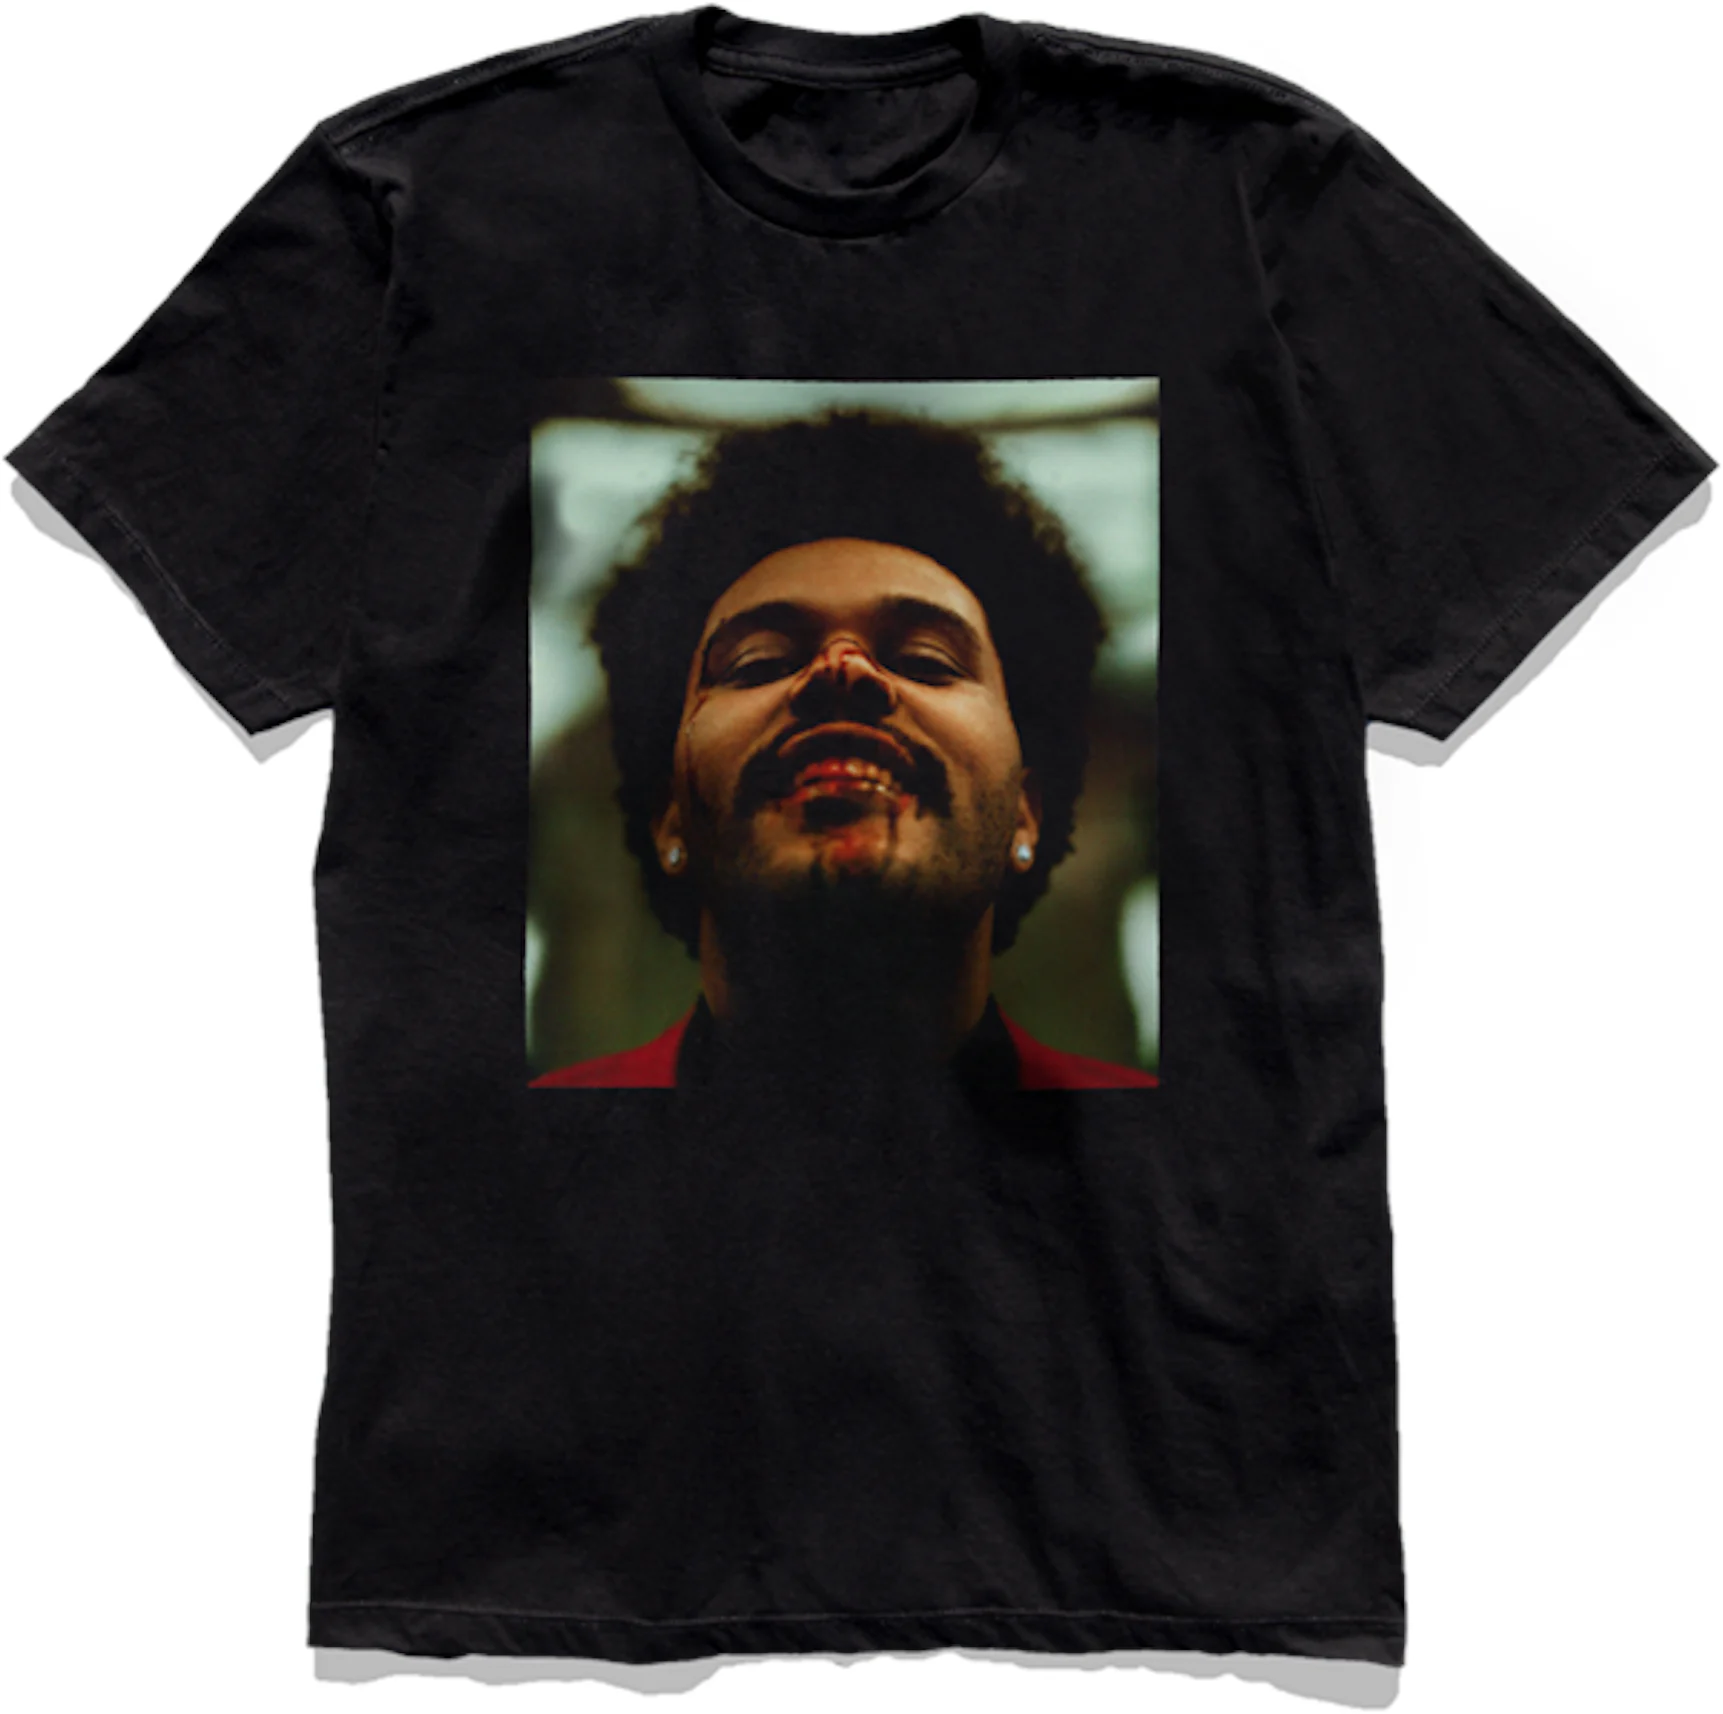 The Weeknd After Hours Photo Tee Black メンズ - SS20 - JP